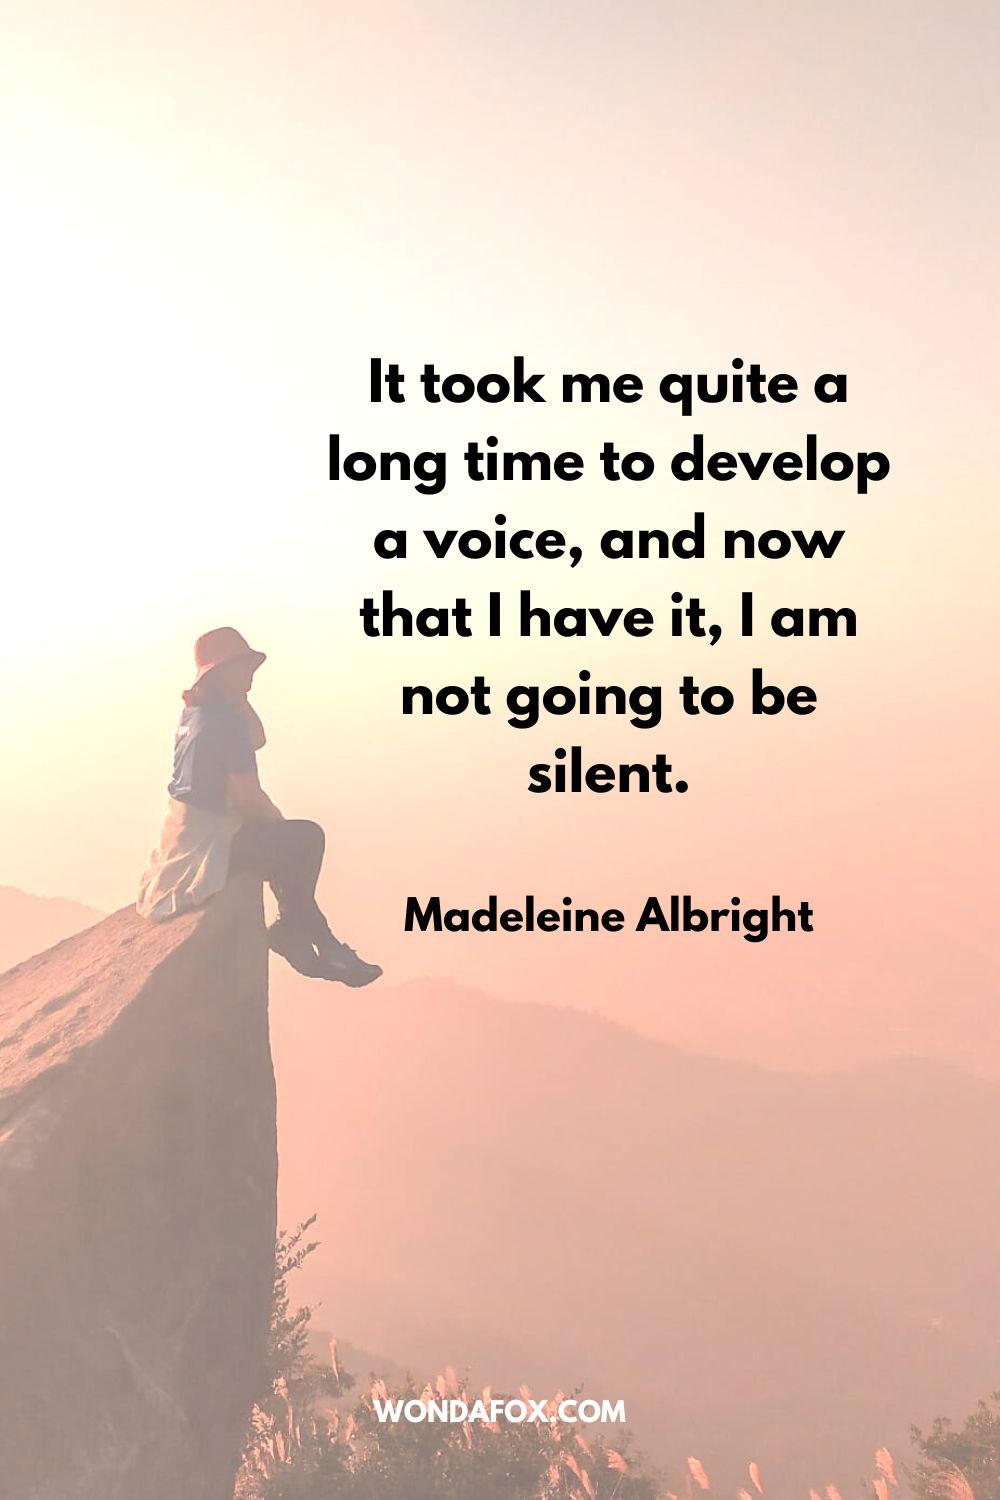 It took me quite a long time to develop a voice, and now that I have it, I am not going to be silent. Madeleine Albright